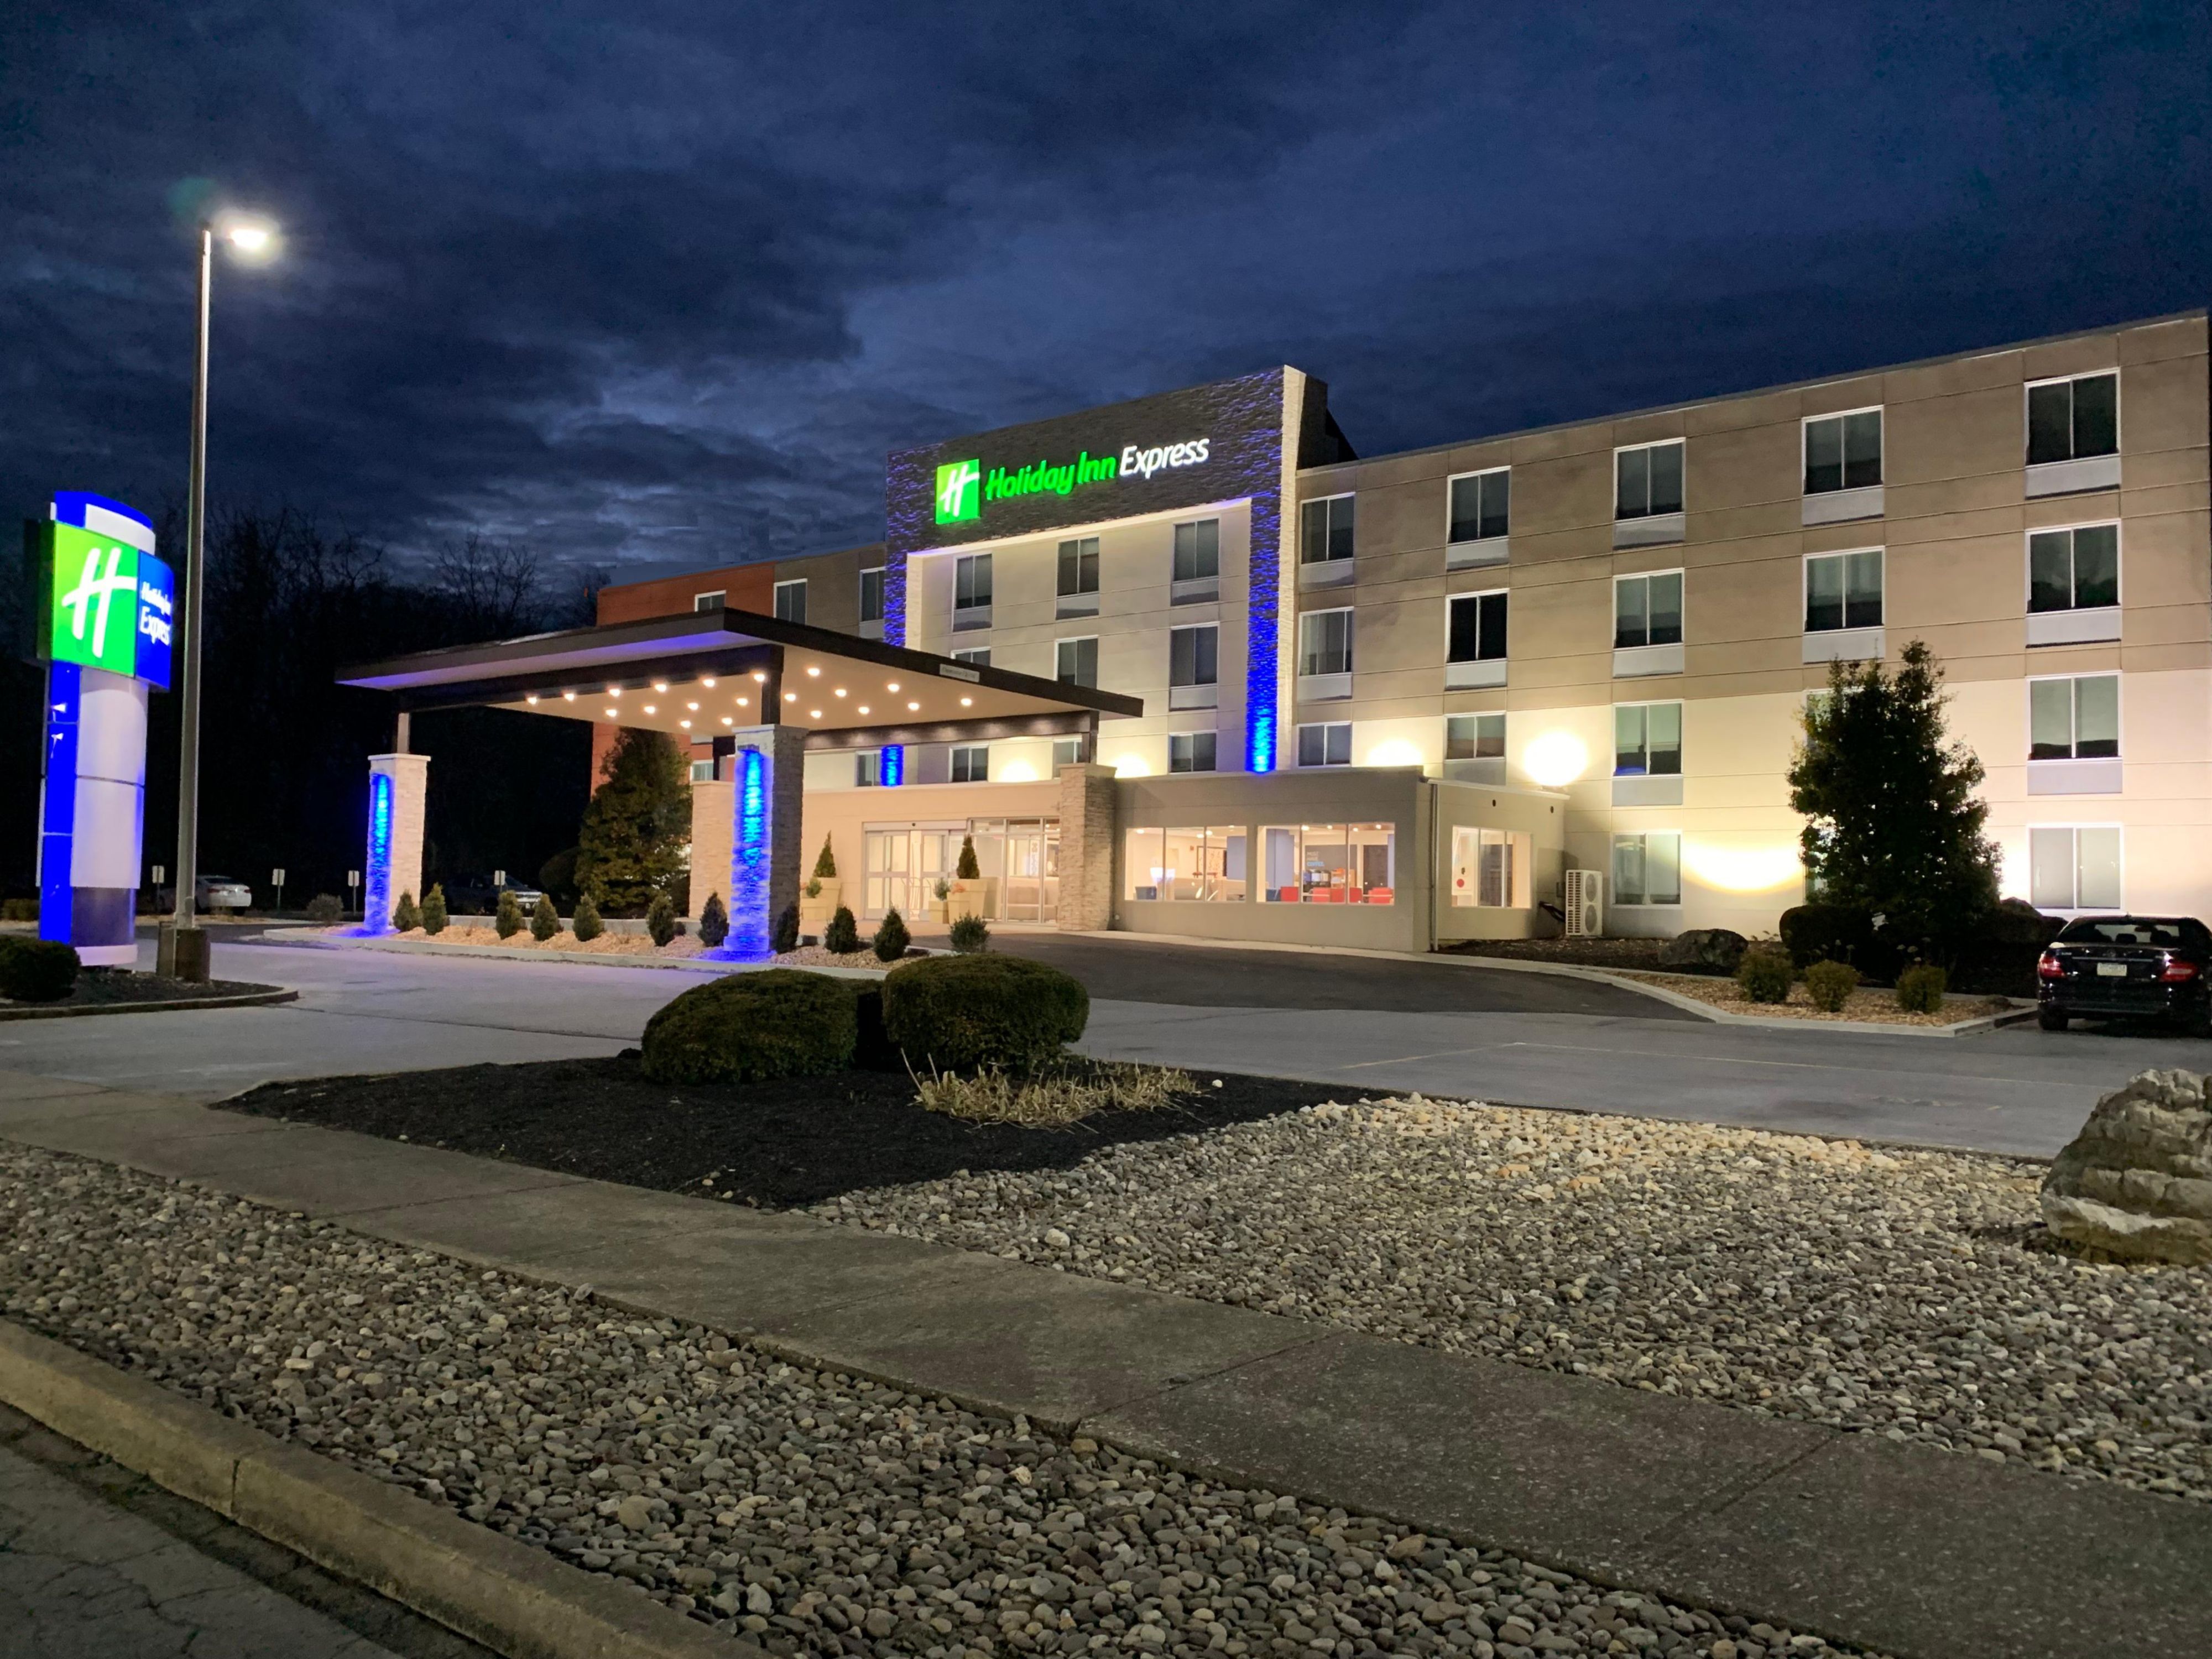 Hotels in Allentown, PA near Allentown Airport | Holiday Inn Express